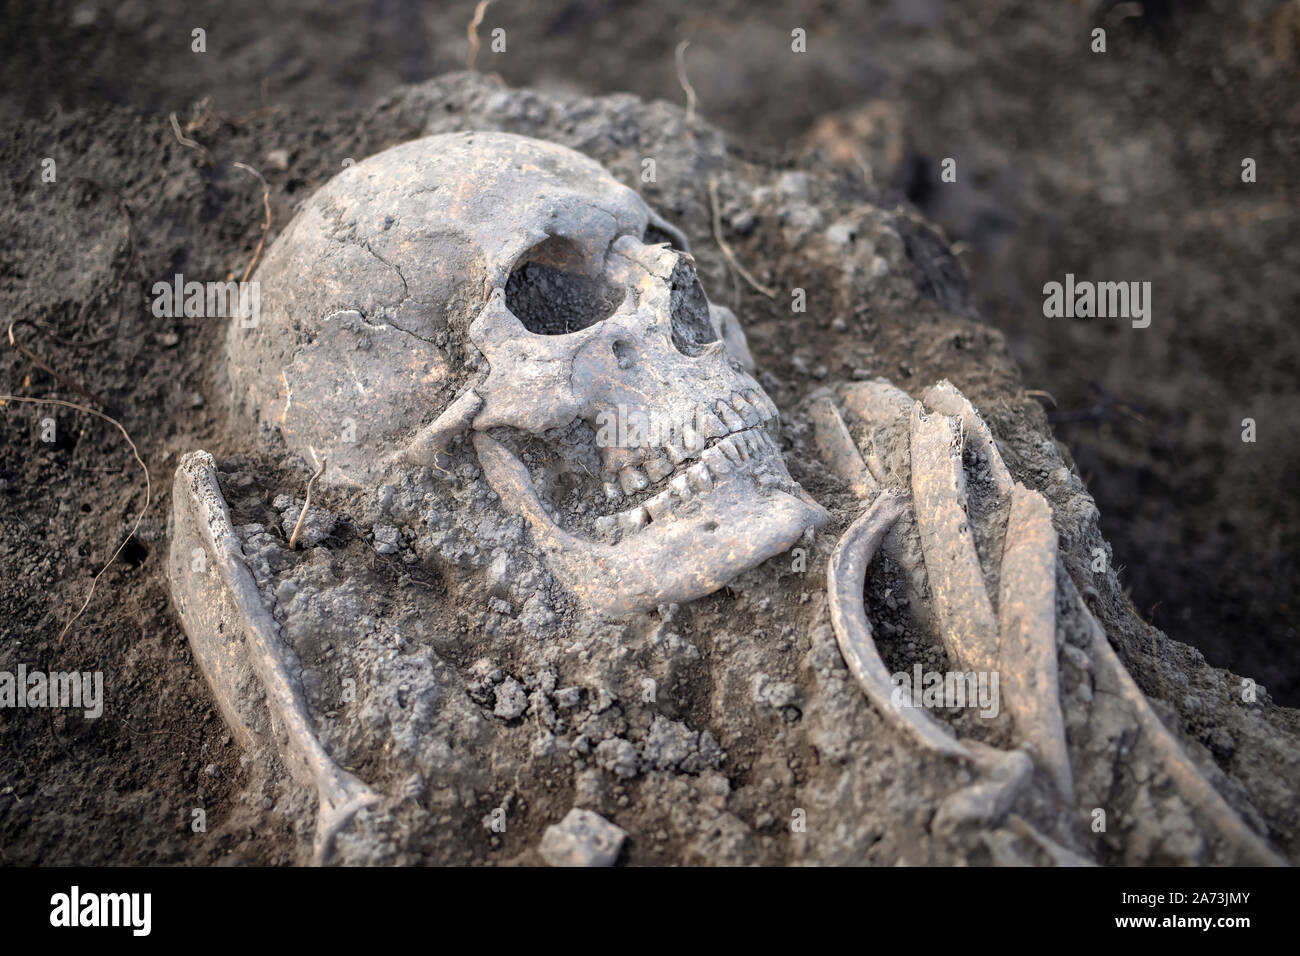 Serbia, September 27, 2019: Human remains from the Roman period discovered during archaeological excavations in Vinča Stock Photo